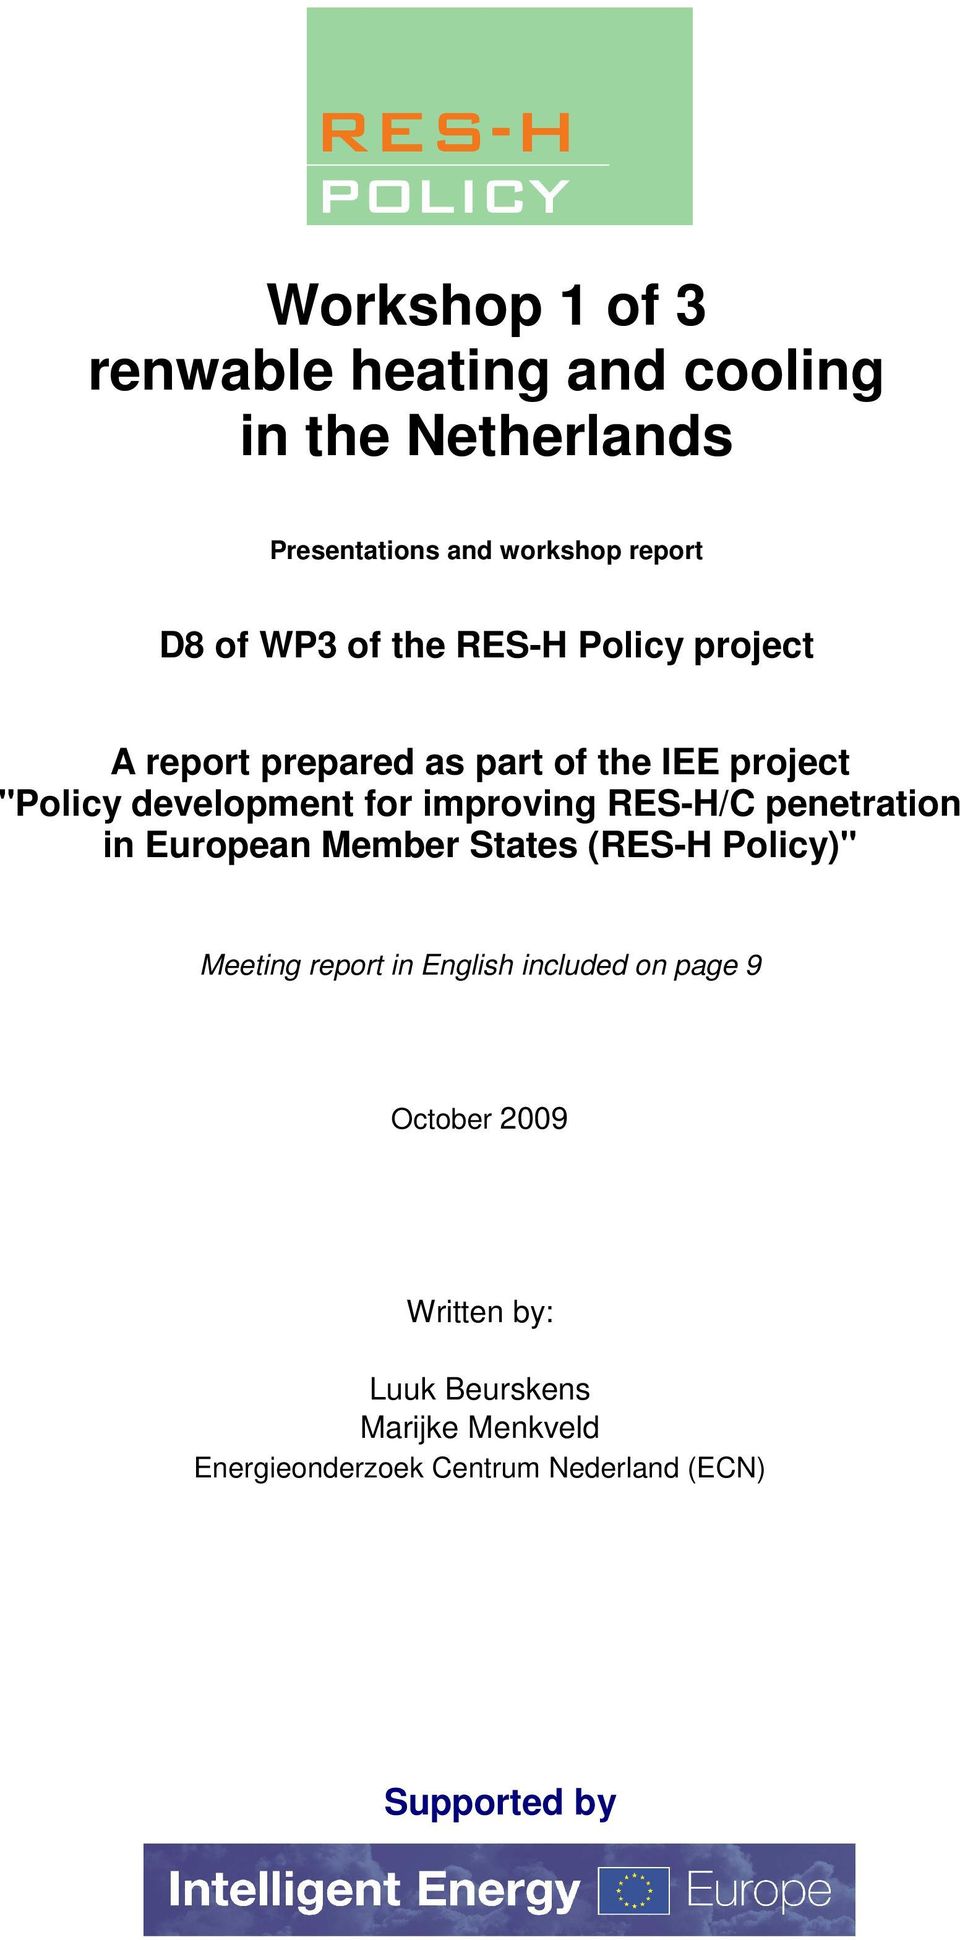 RES-H/C penetration in European Member States (RES-H Policy)" Meeting report in English included on page 9